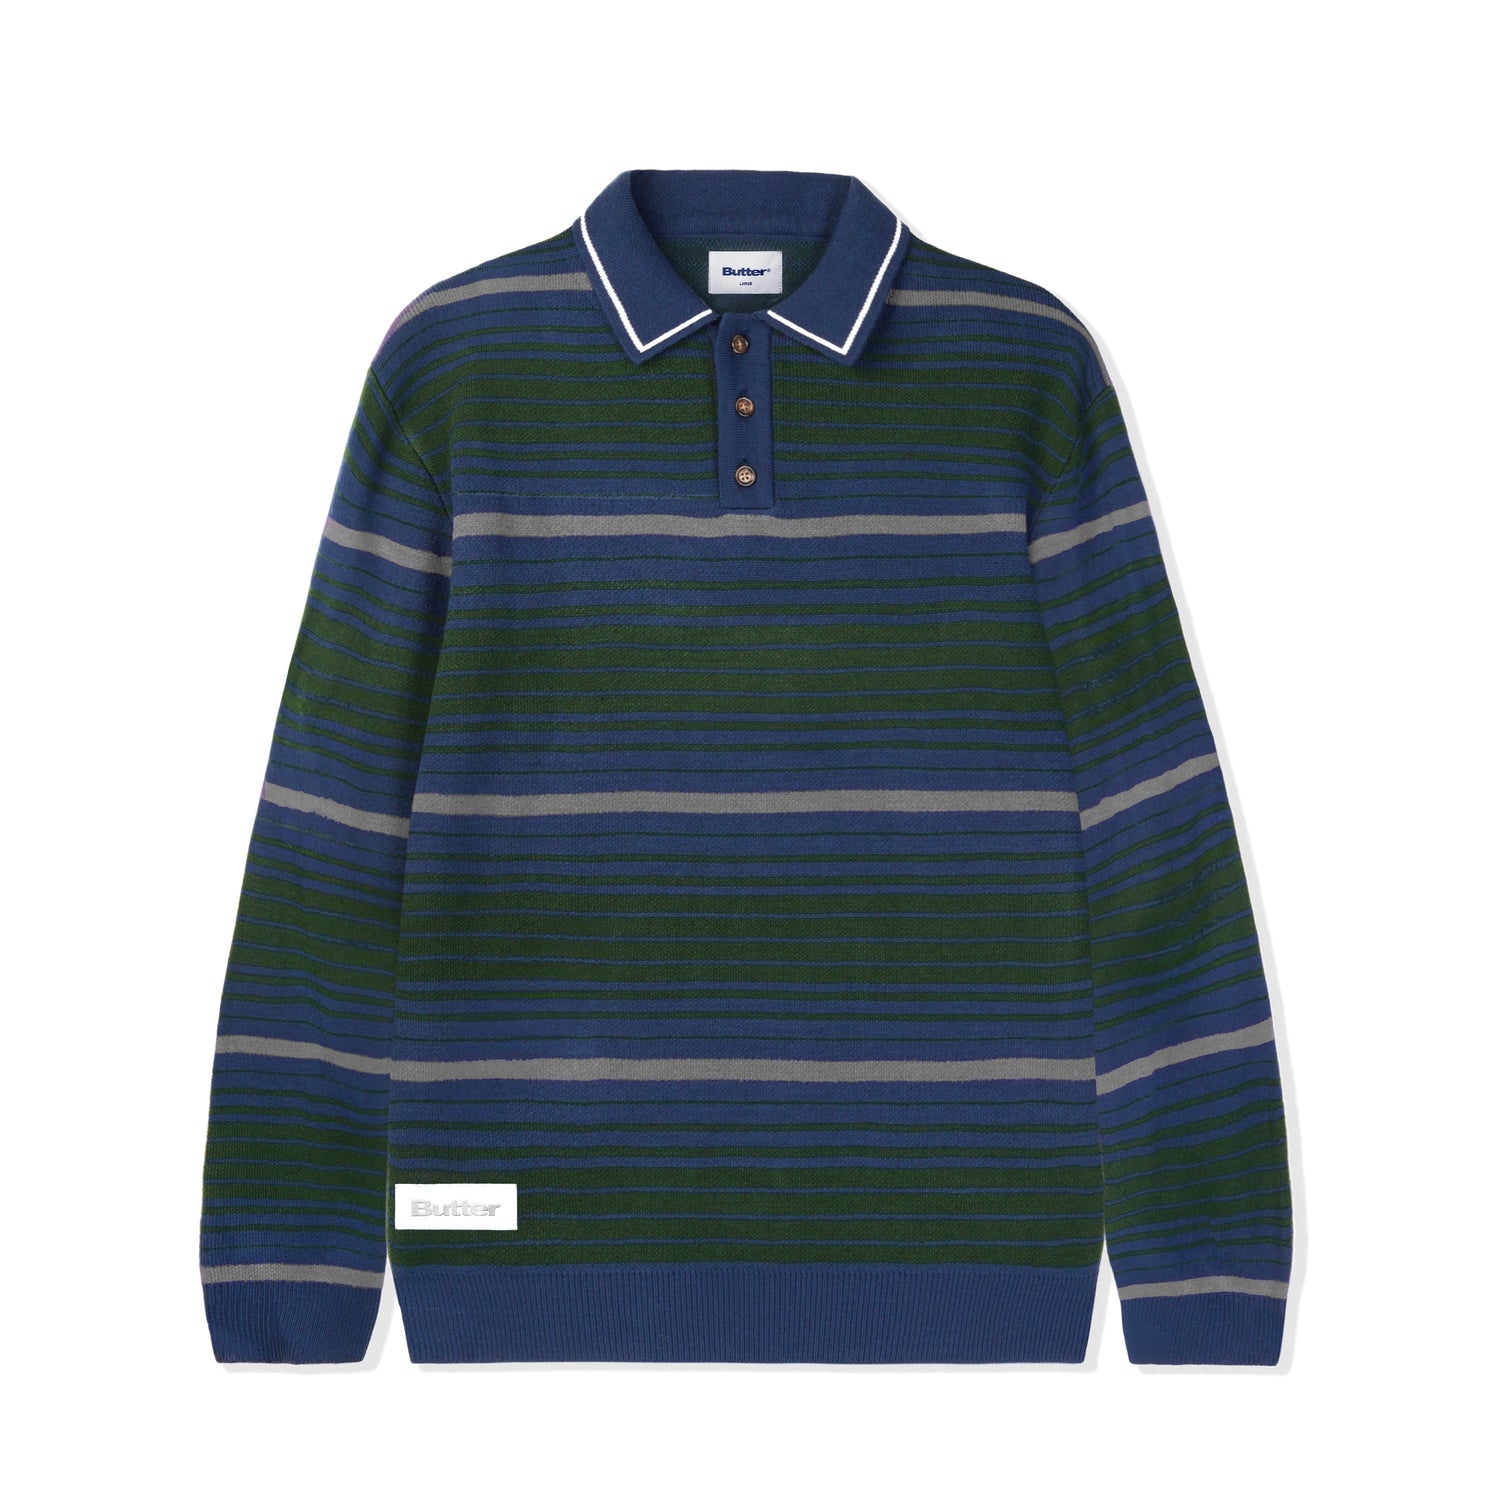 Stripe Knitted Shirt, Navy / Forest / Grey